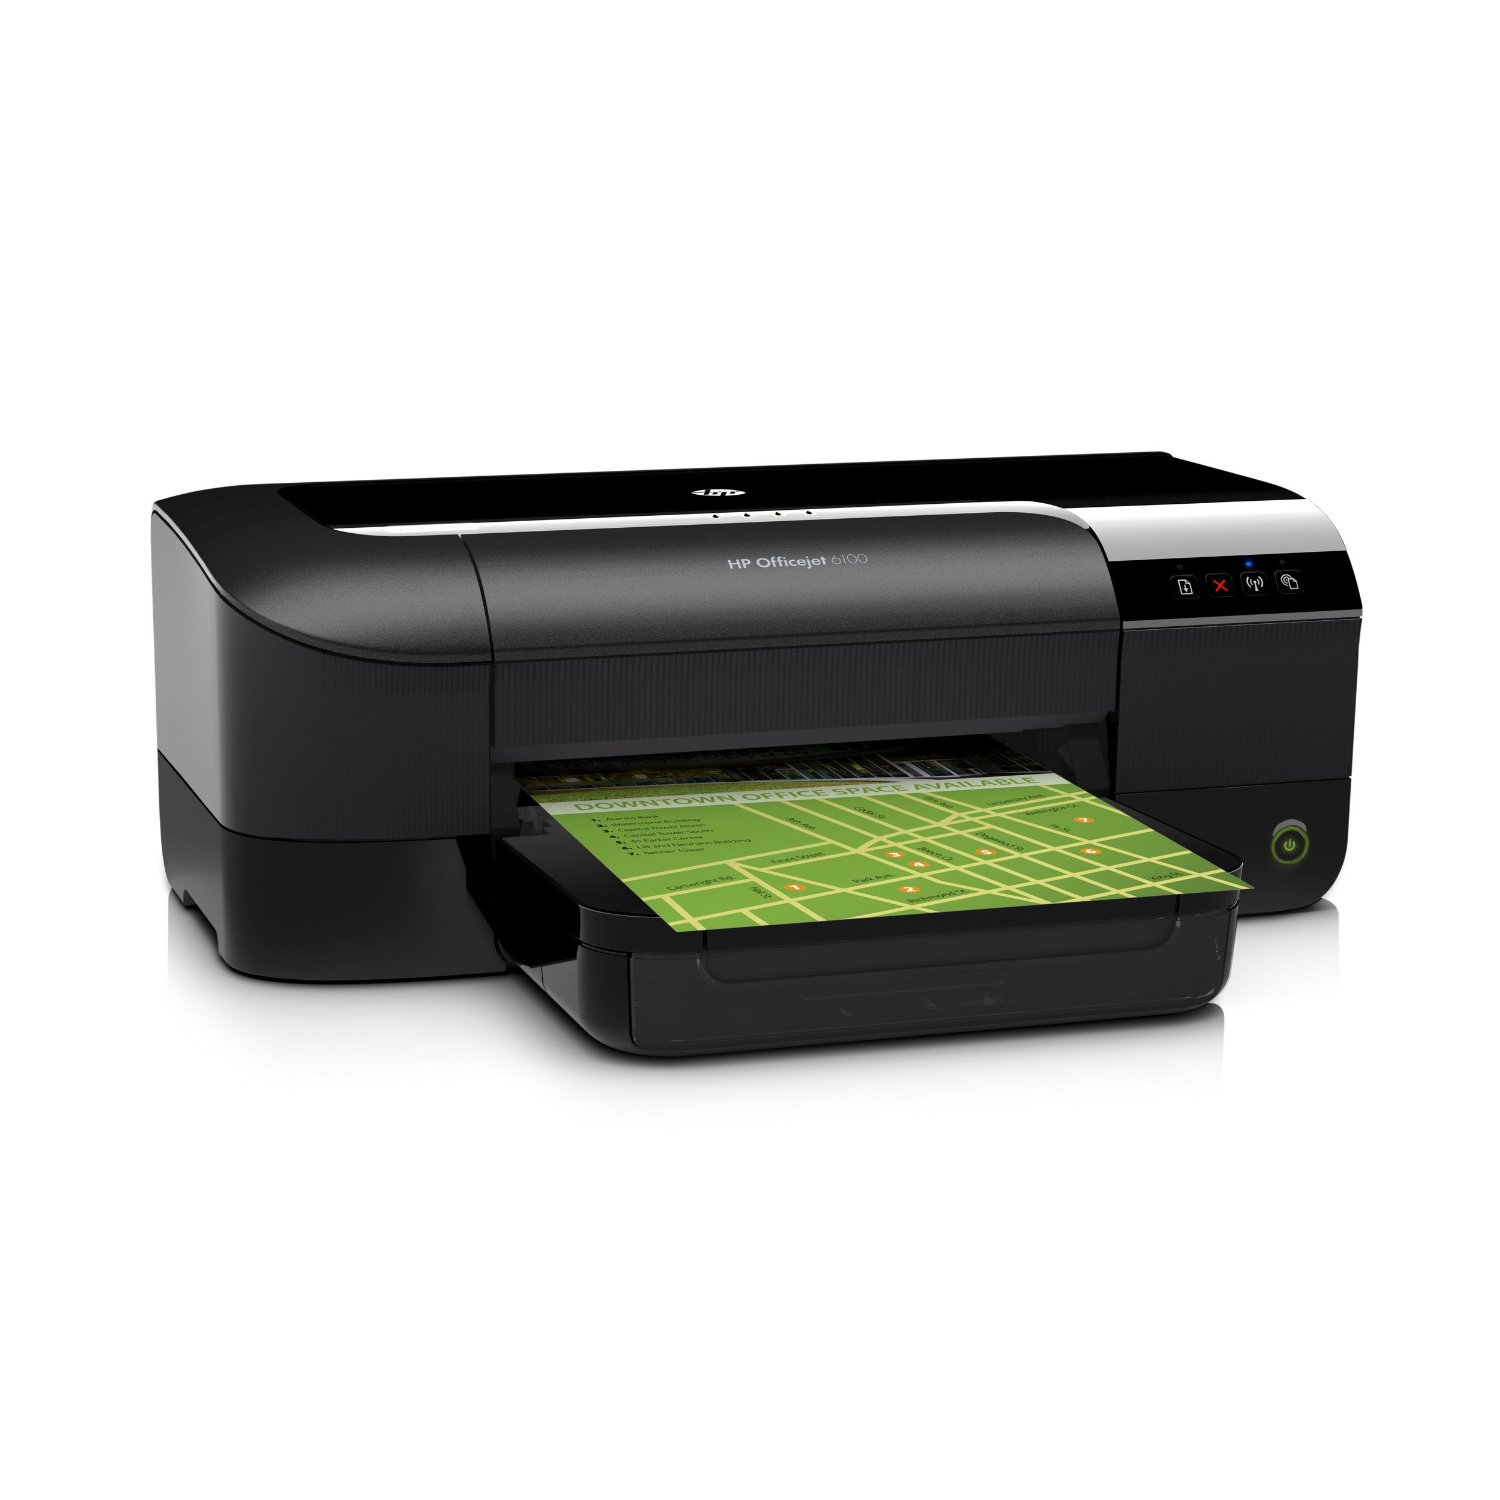 HP OfficeJet 6100, stampante AirPrint ed Ethernet, solo 59 euro 